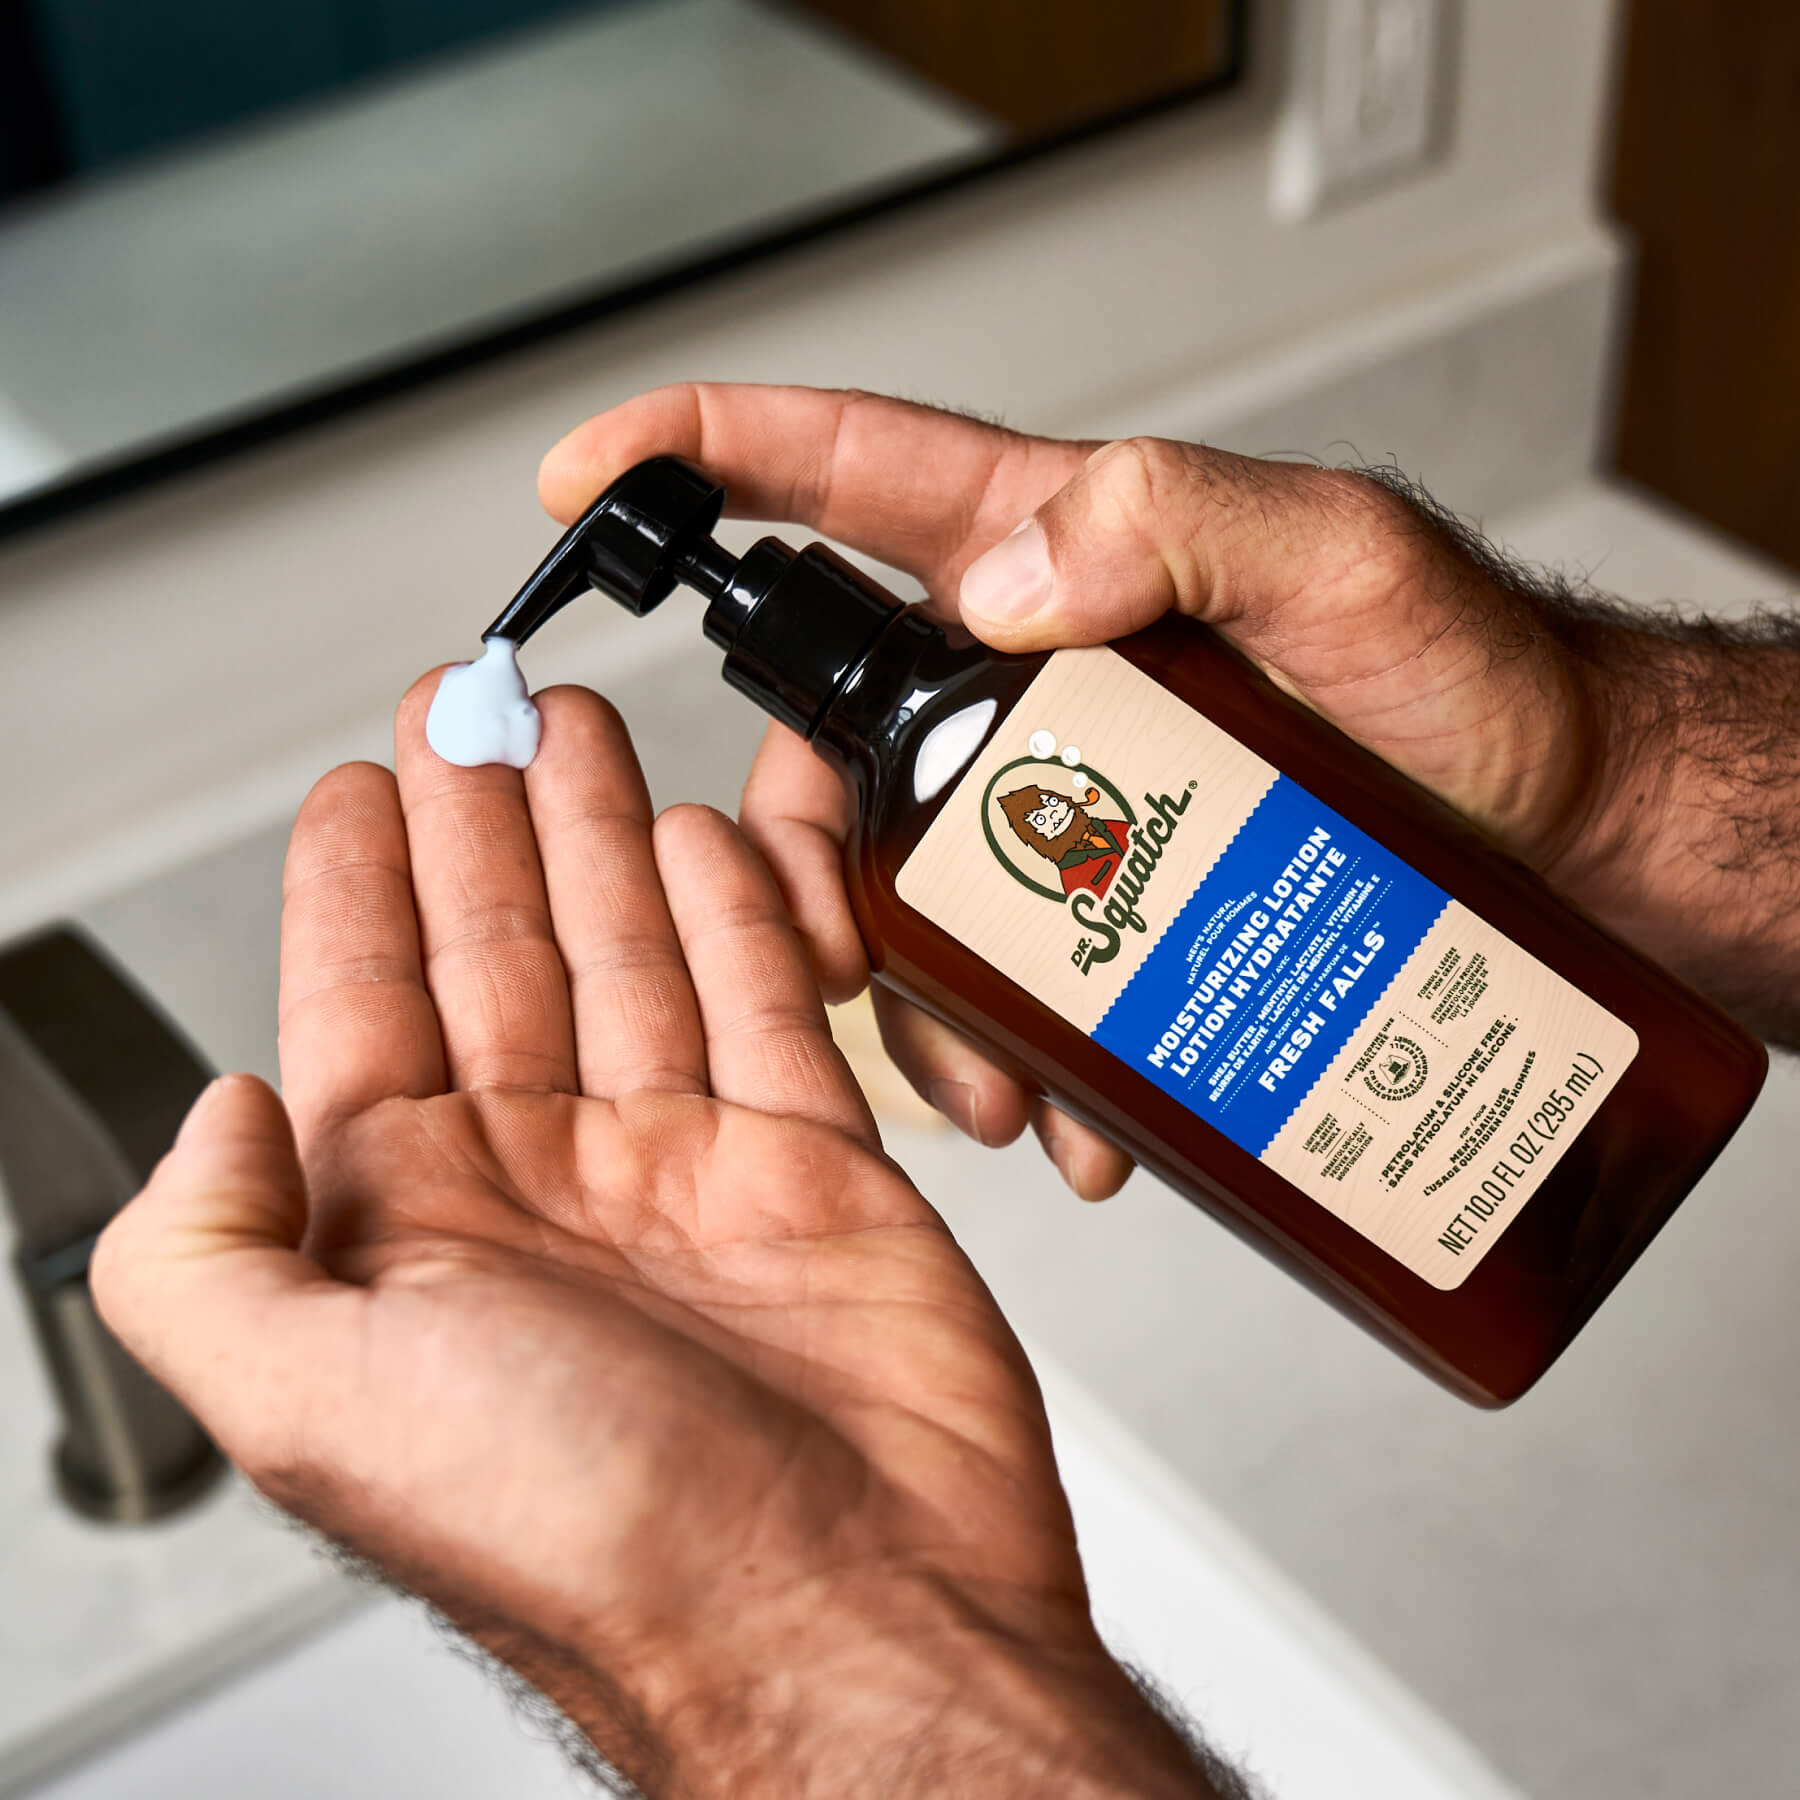 Dr. Squatch - Revitalize your skin with our NEW Fresh Falls Lotion